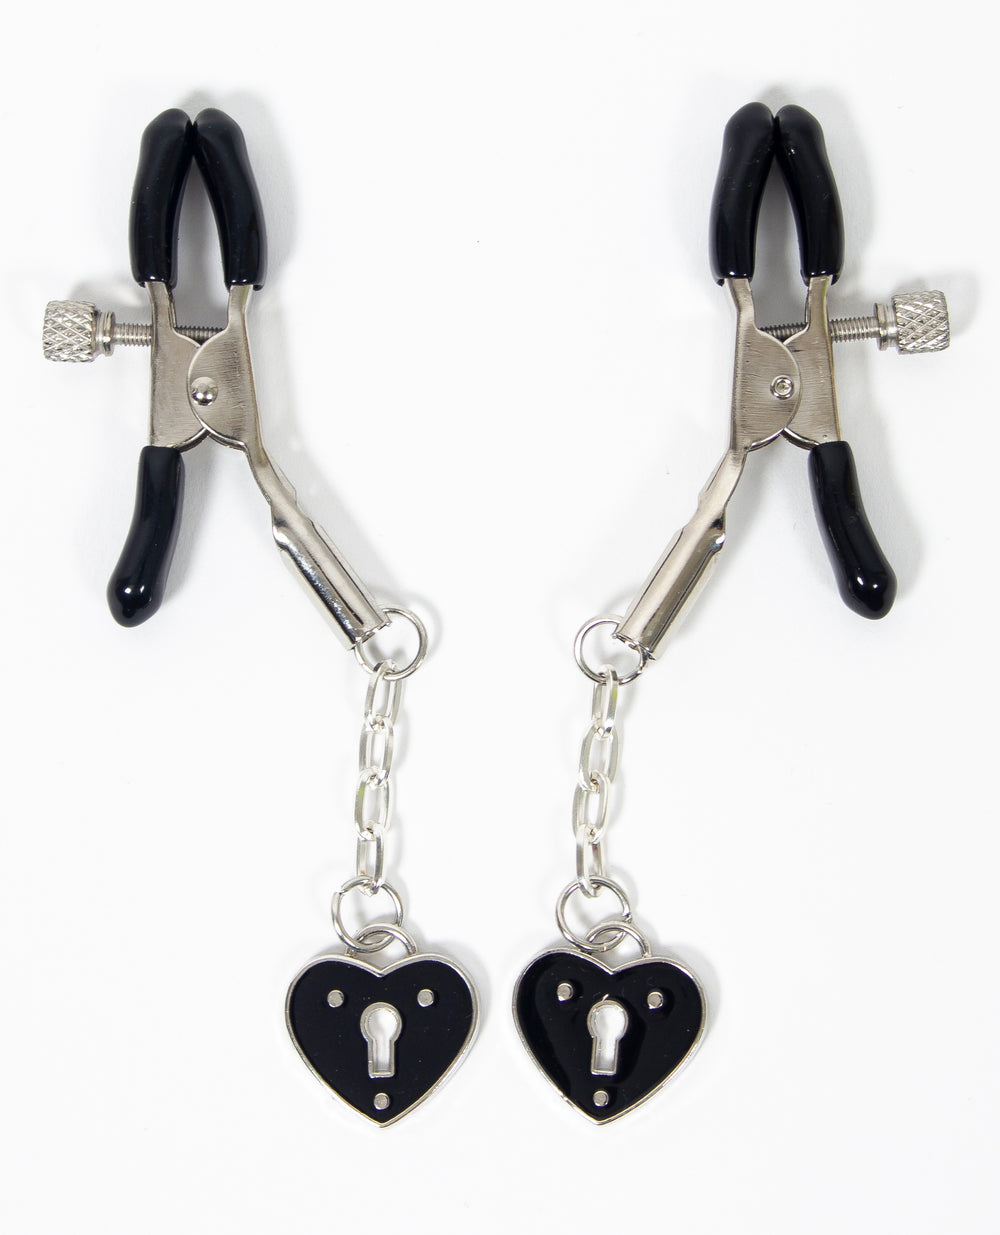 HEART CHARM CLAMPS.